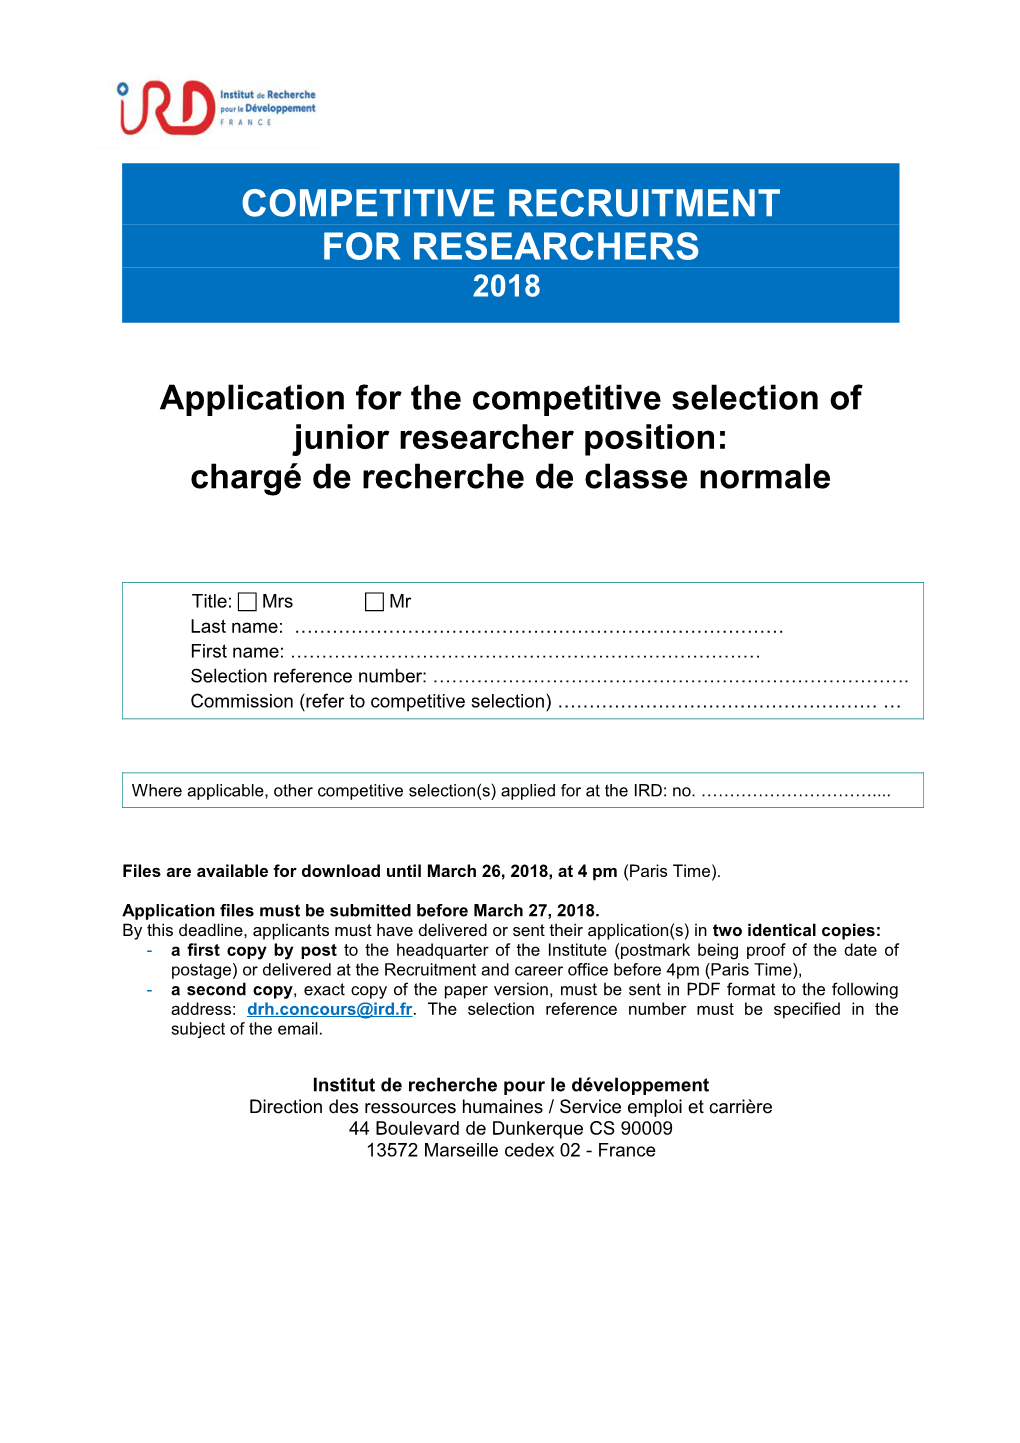 Applicationfor the Competitive Selection Ofjunior Researcher Position